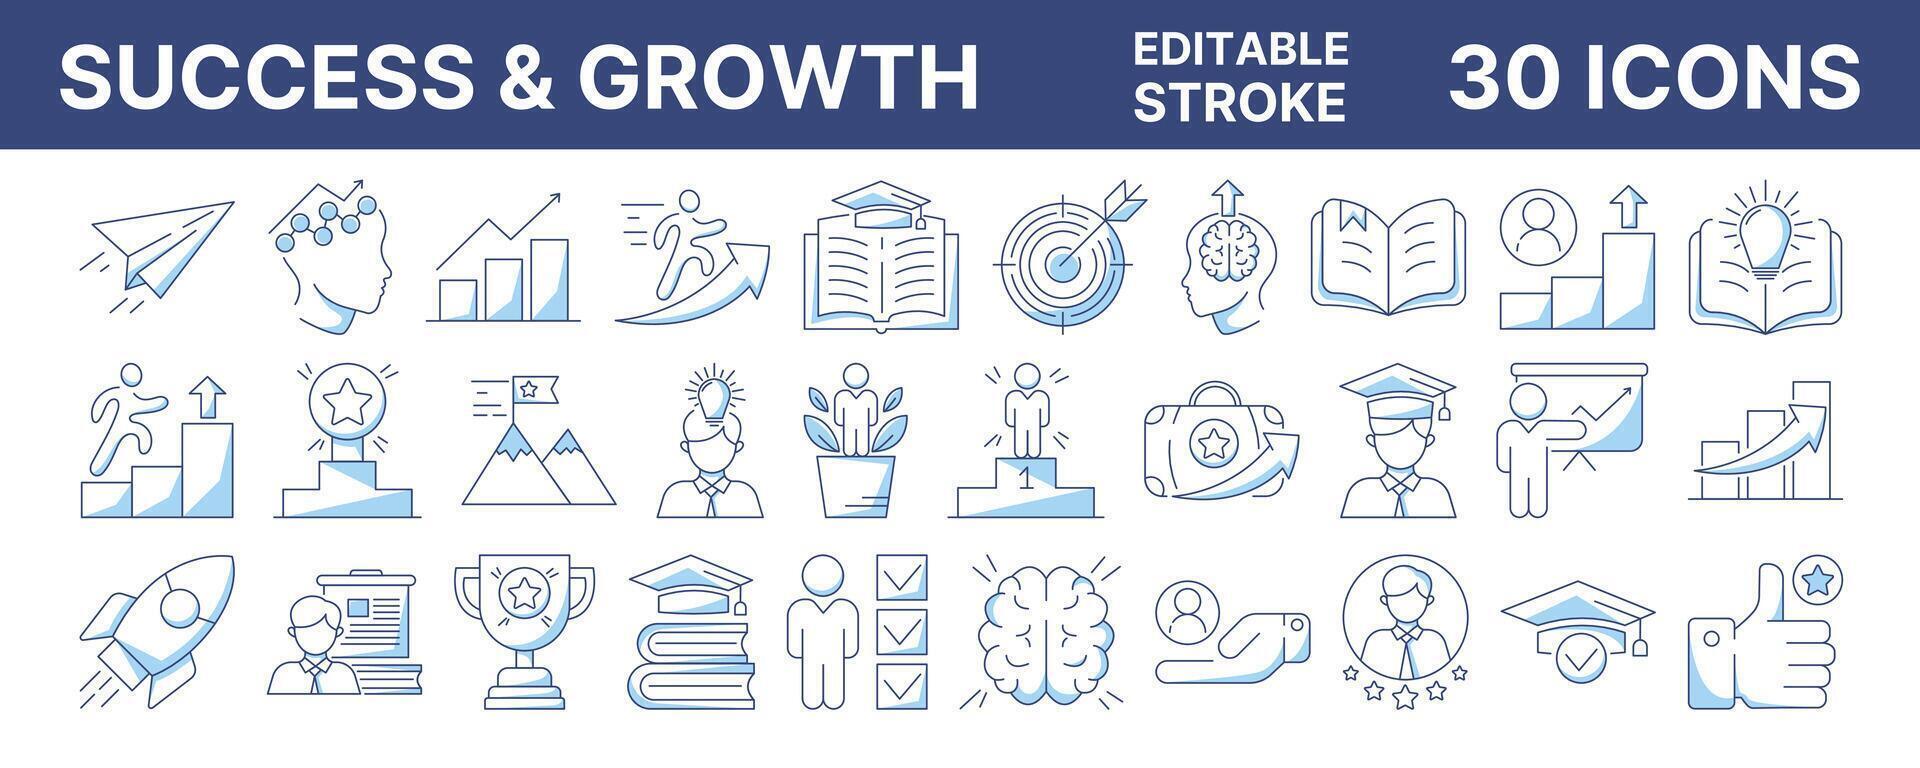 Success and personal, professional, financial or career growth, upskilling. Linear icon set, editable stroke, color. Business, education collection, progress, goal achievement, motivation signs vector